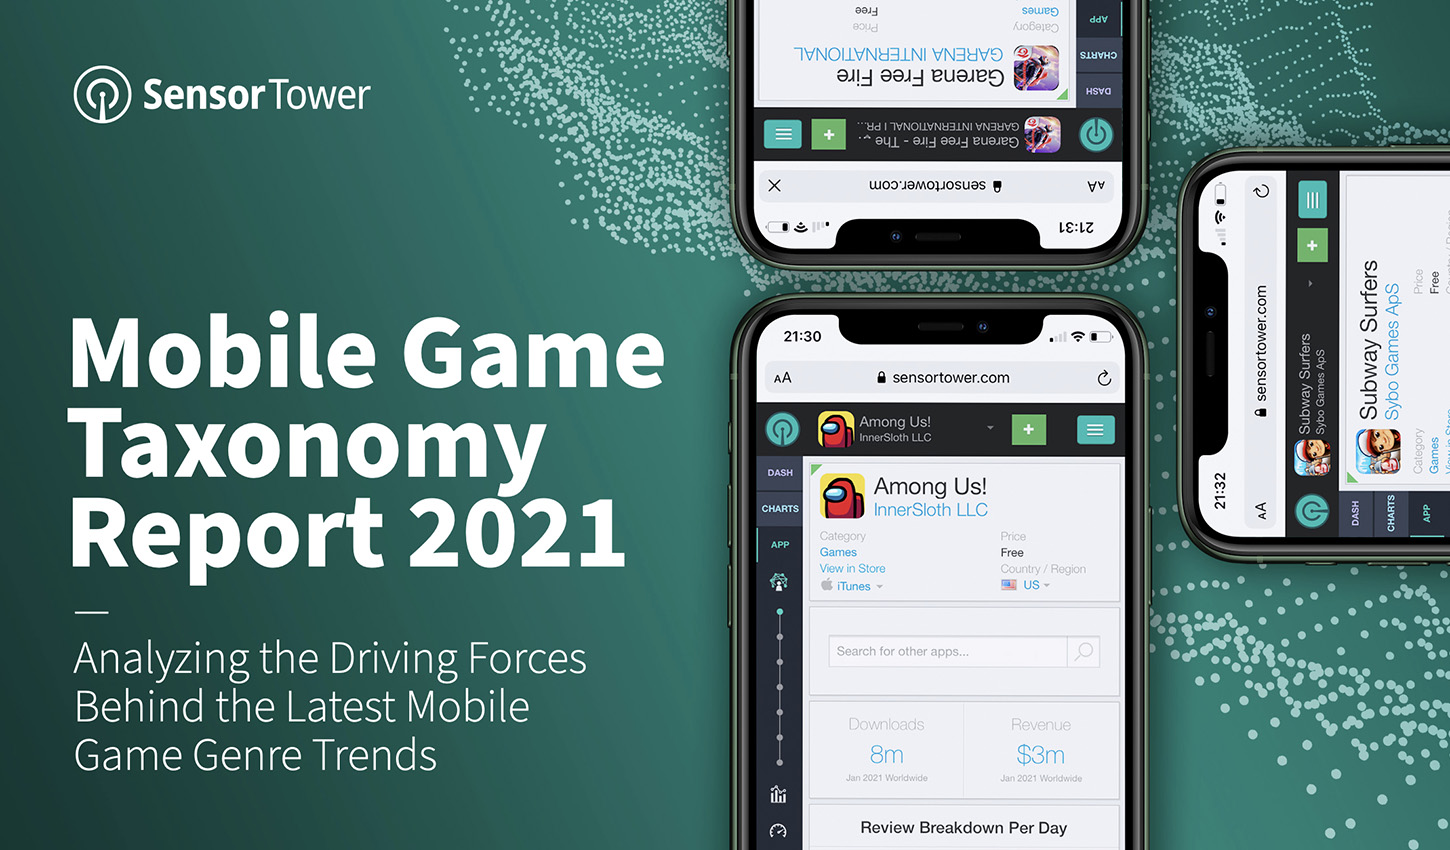 Mobile Game Taxonomy Report 2021 main image feature